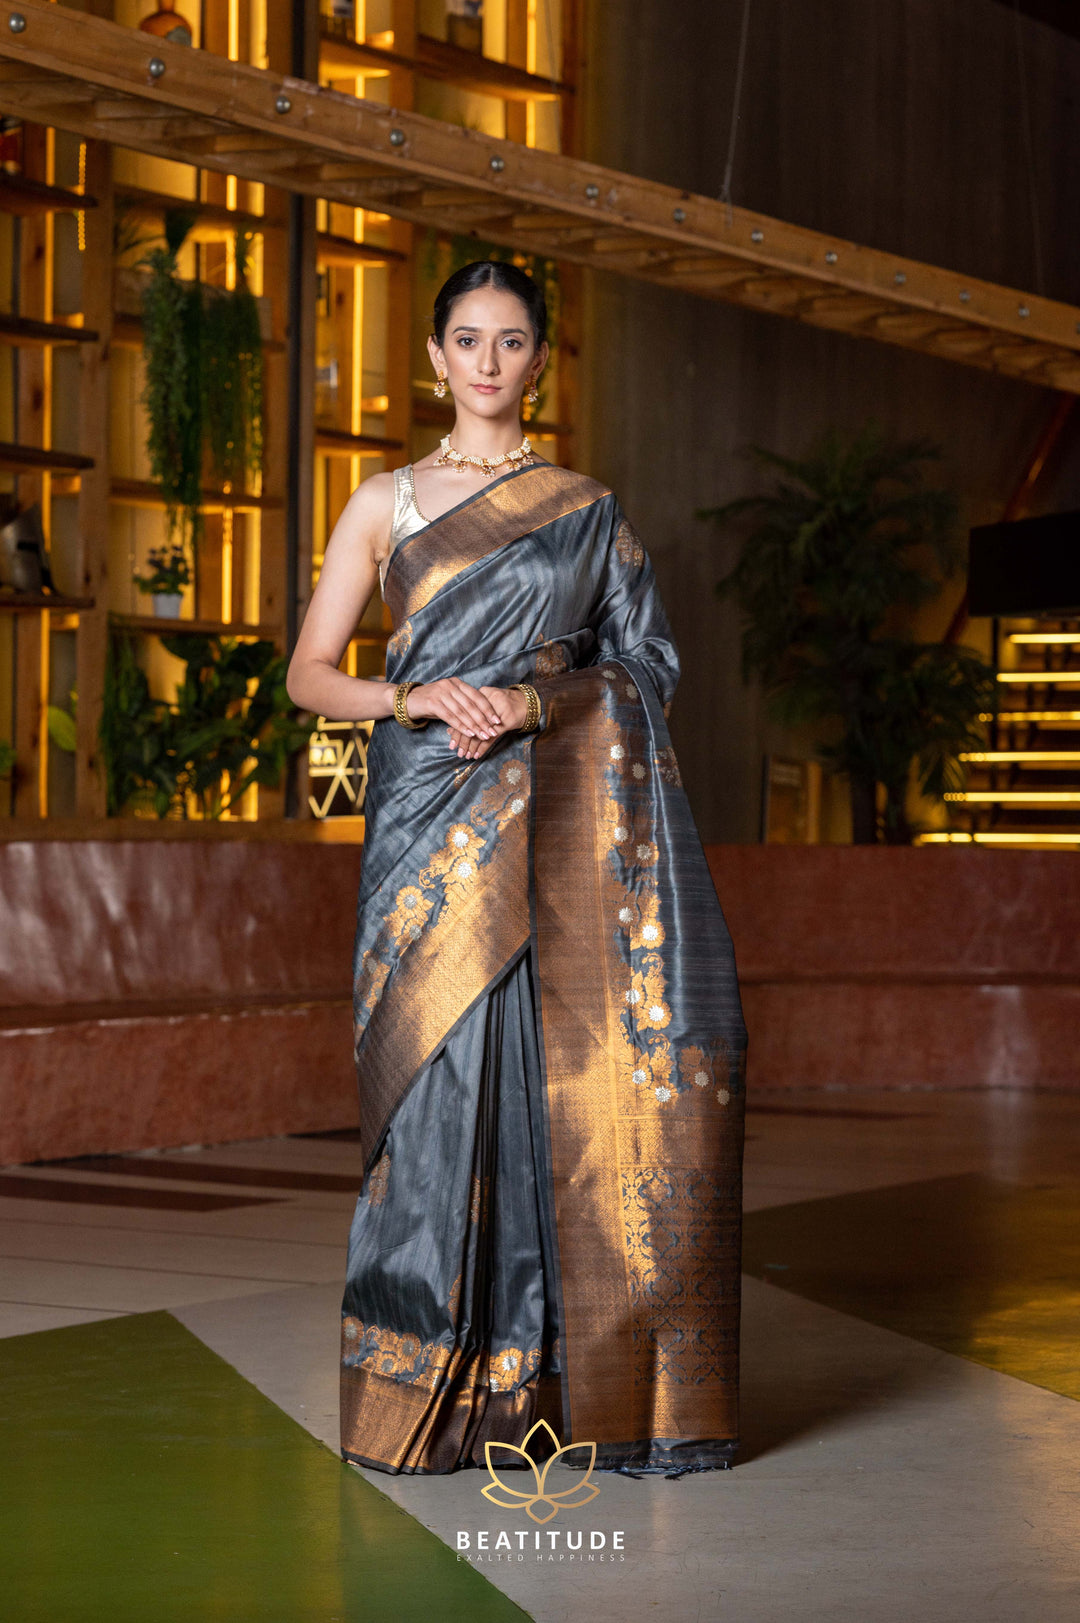 Beatitude Grey Gold-Toned Ethnic Motifs Zari Tussar Saree with Unstitched Blouse